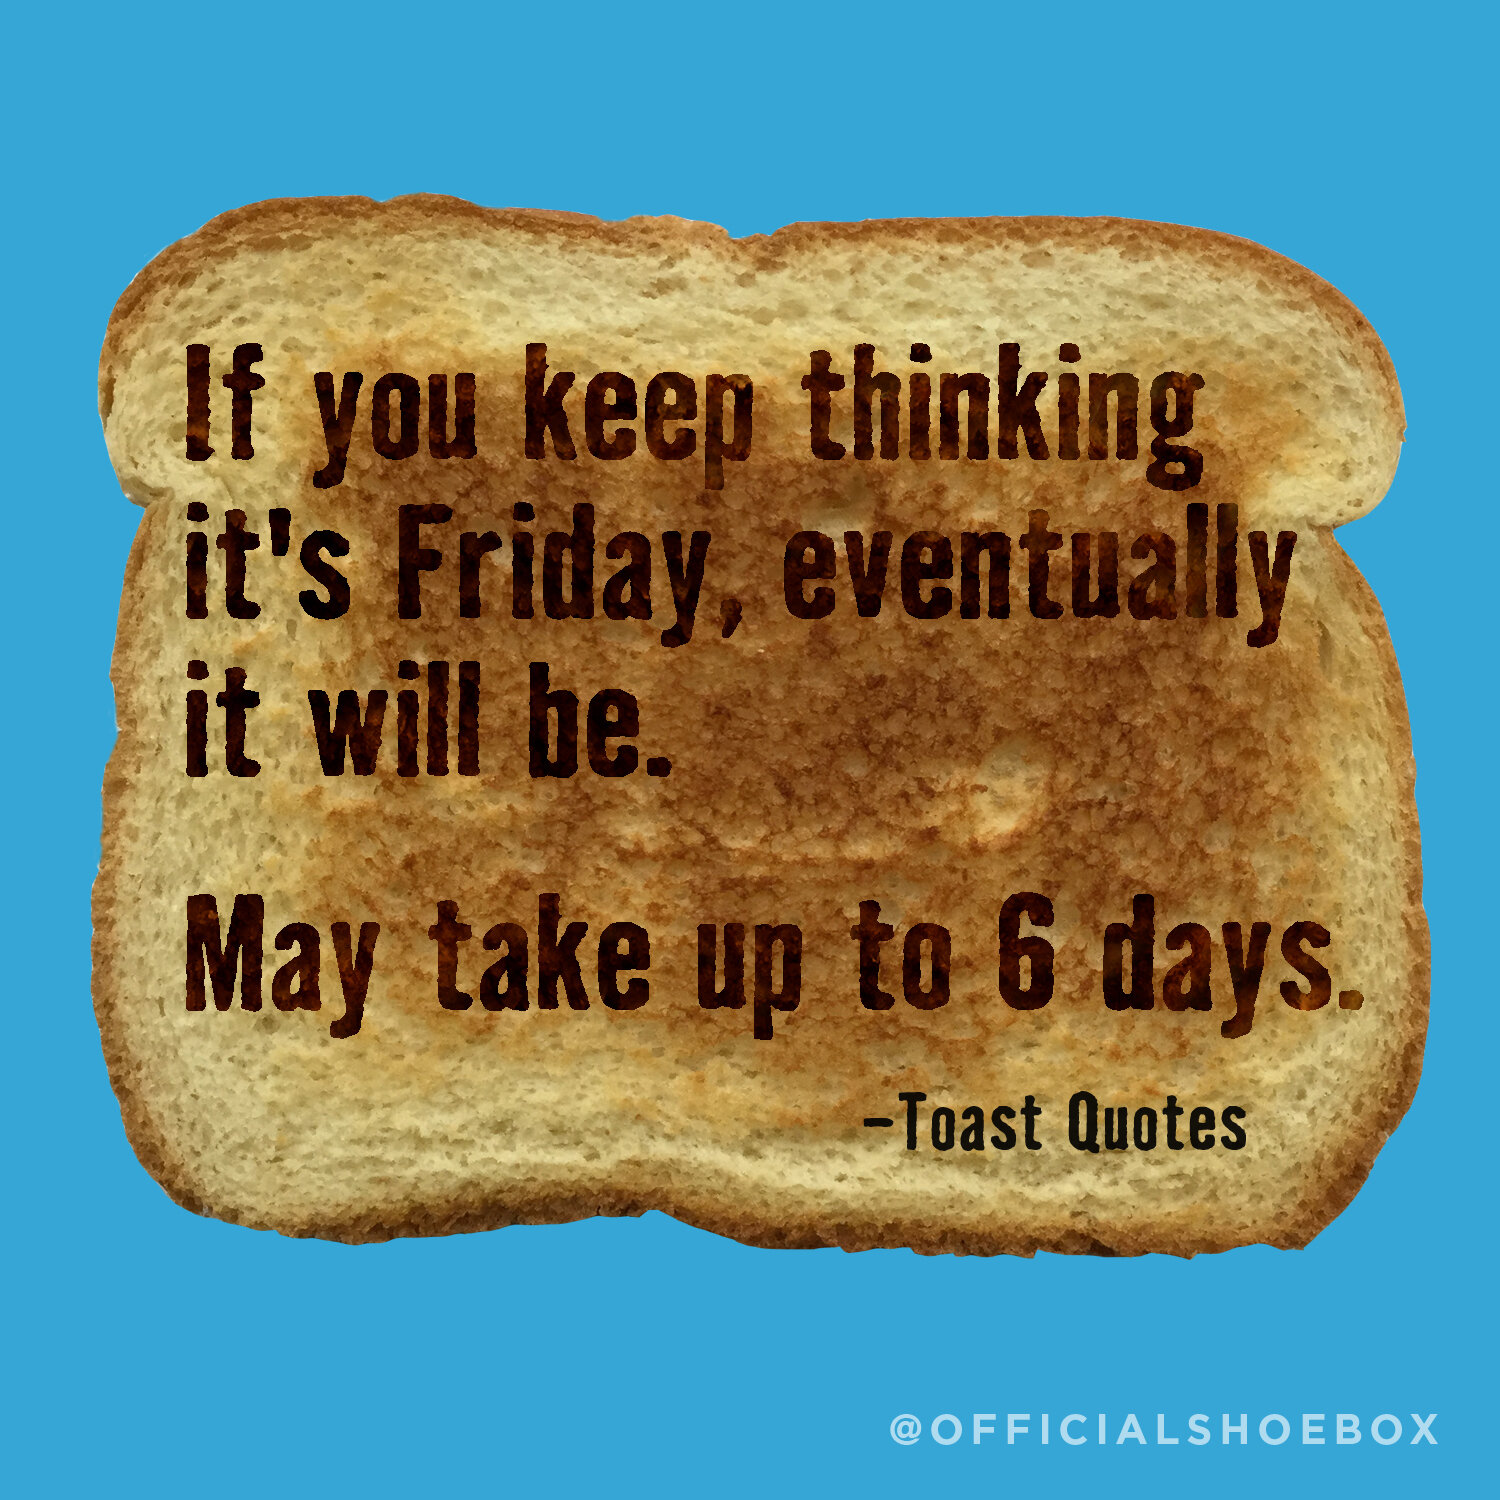 ToastQuotes-friday.jpg